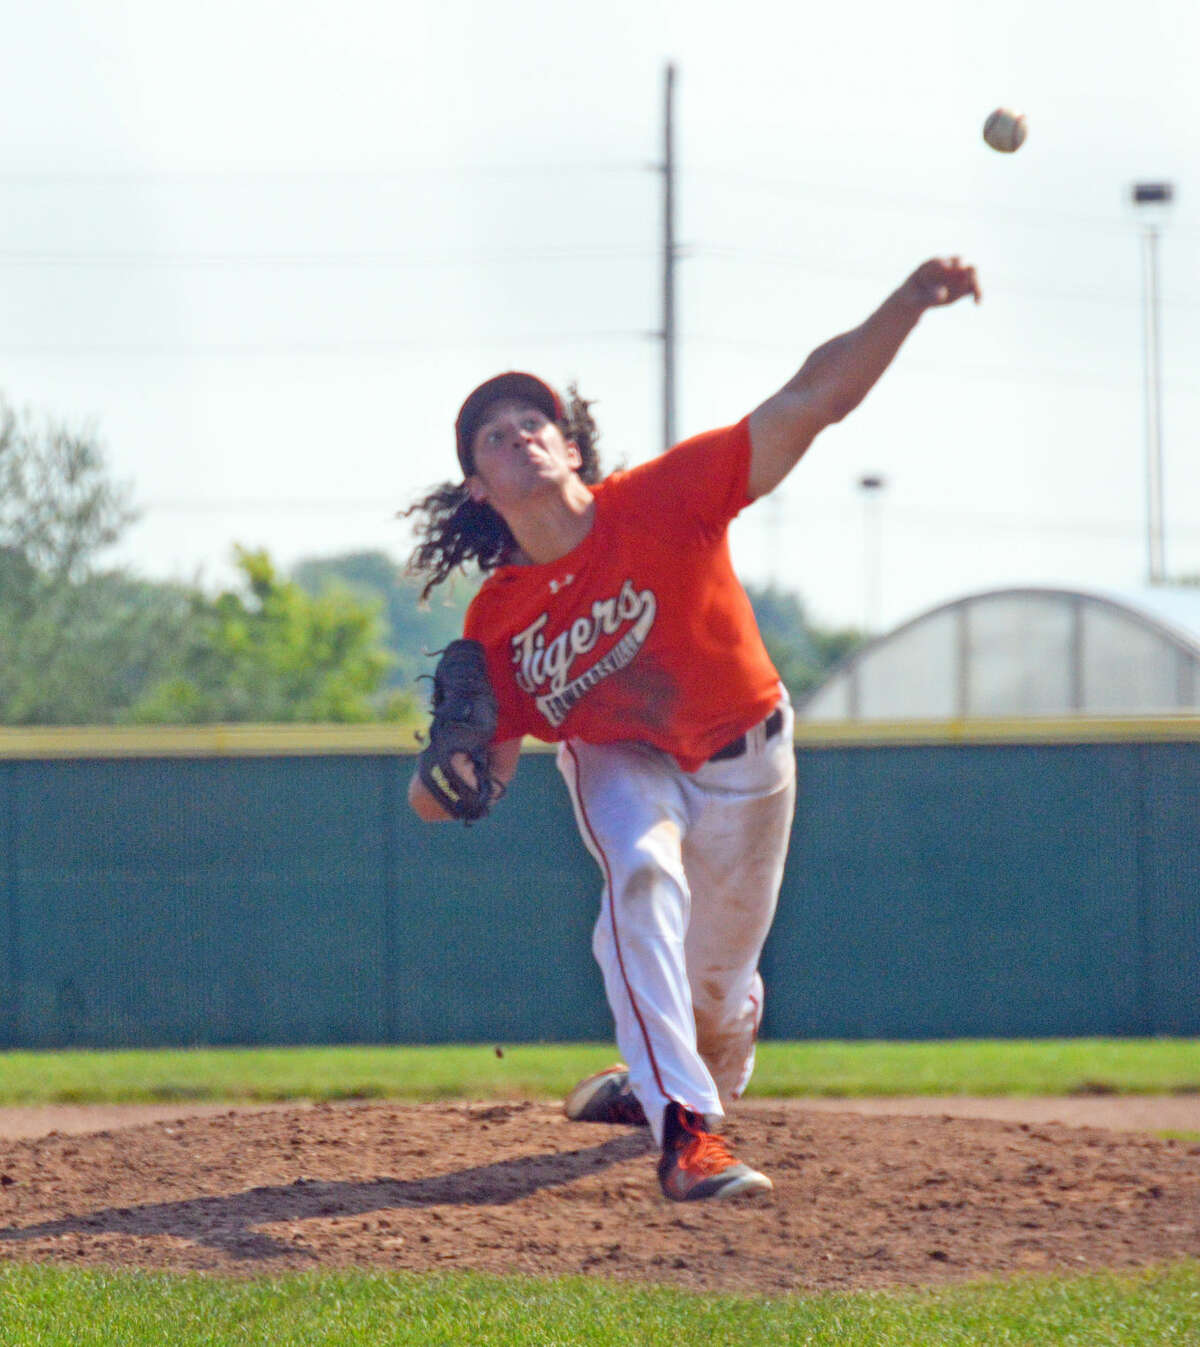 Edwardsville starting pitcher Daniel Picchiotti delivers a pitch in the second inning against the Ozark Baseball Club at Tom Pile Field.